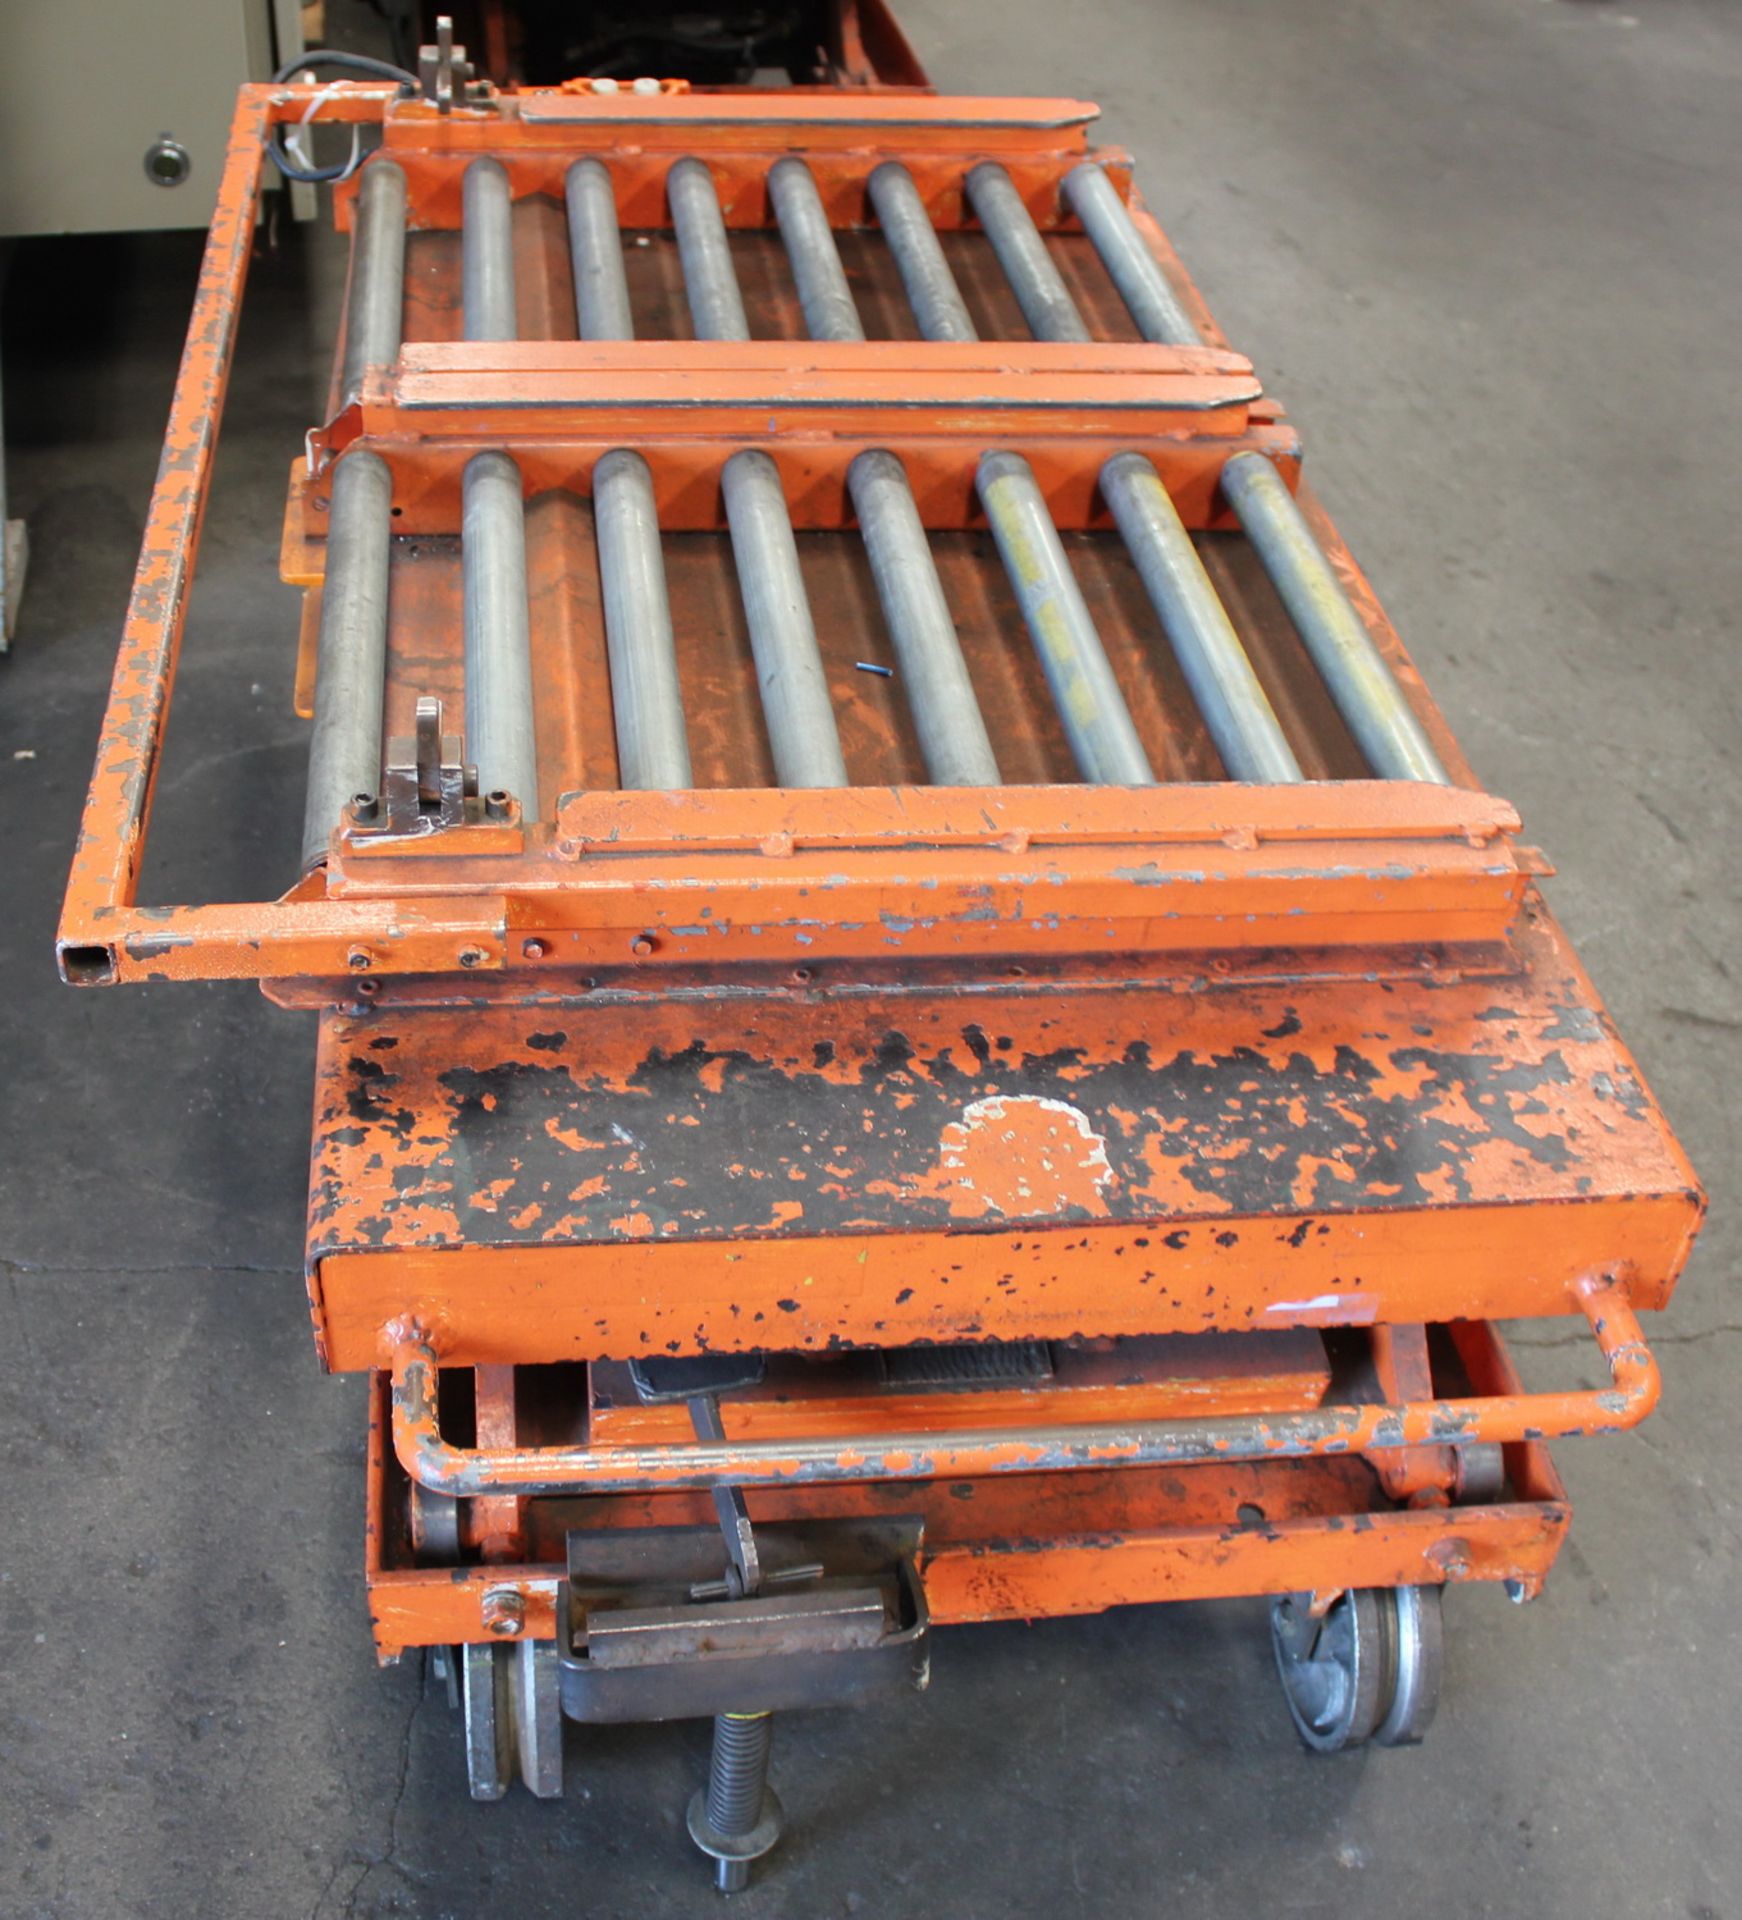 Presto Hydraulic Scissor Lift Table 2,000 Lbs. x 48'' x 24''. LOADING FEE FOR THIS LOT: $50 - Image 6 of 8